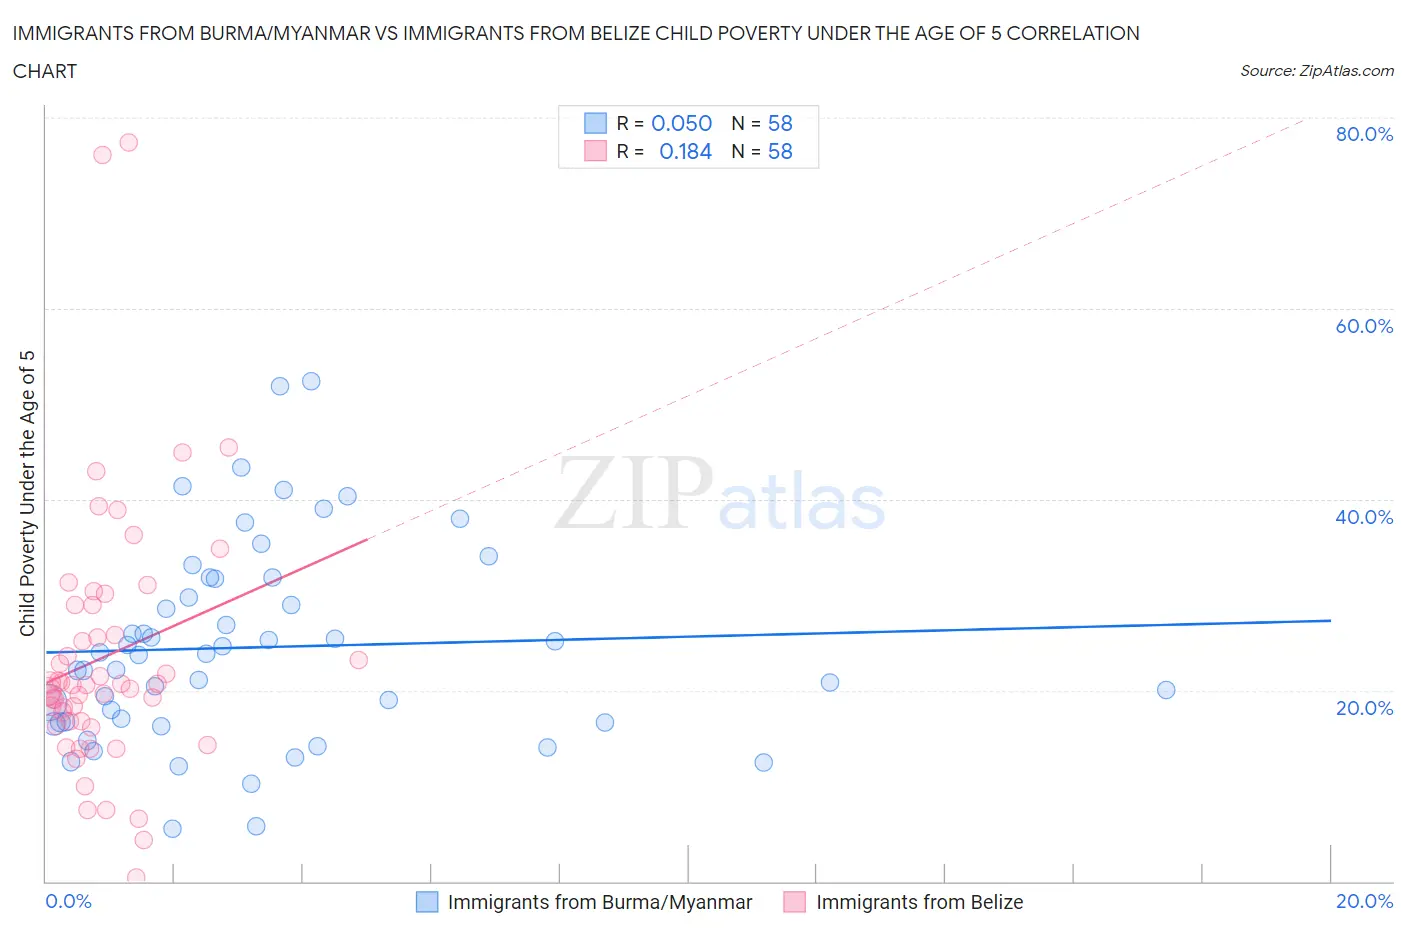 Immigrants from Burma/Myanmar vs Immigrants from Belize Child Poverty Under the Age of 5